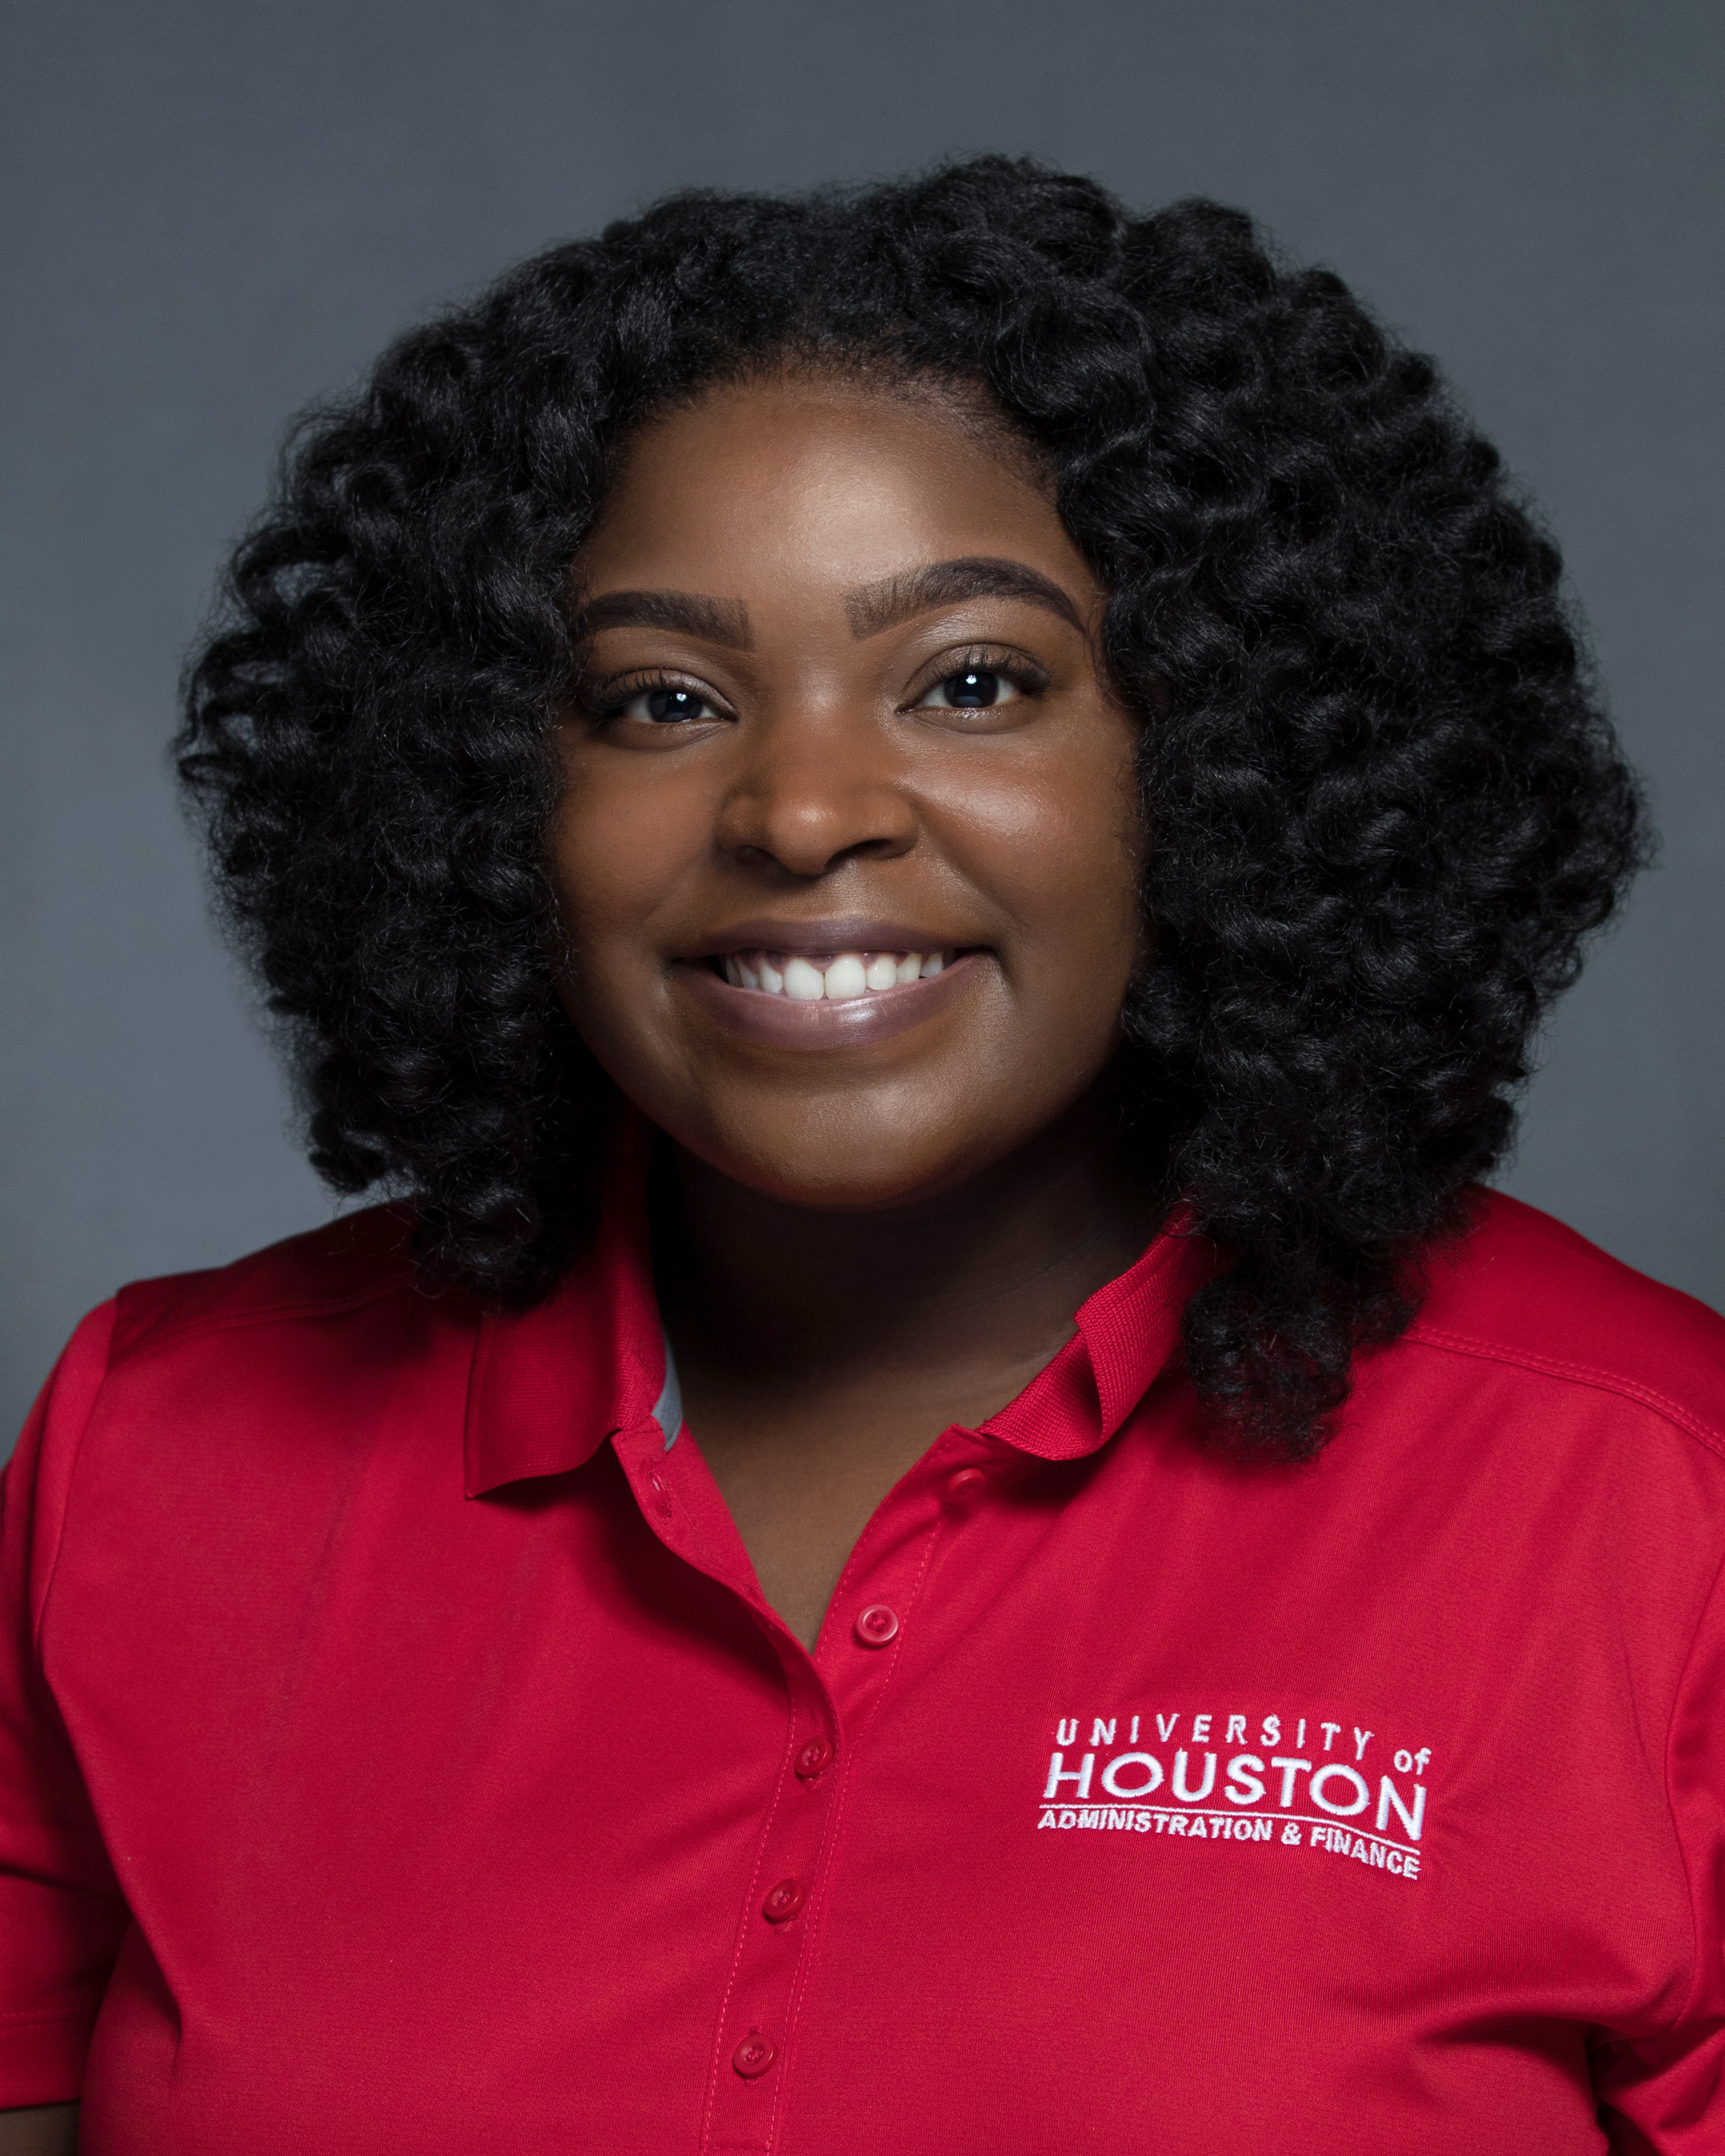 On November 8, 2021, Imani Anderson, UH Health Inspector, passed her registered sanitarian examination for Texas. Registered sanitarians are public health professionals qualified by specific education, specialized training, and field experience to protect the public's health, safety, and general welfare from adverse environmental determinants. Requirements to become a registered sanitarian include holding a bachelor's degree from an accredited college or university, including at least 30 semester hours in a basic or applied science and at least two years of full-time experience in the fields of consumer health, environmental health, or sanitation.  “I am proud of Imani’s achievement of becoming a registered sanitarian. This shows her commitment to life-long learning and her dedication to the health and welfare of our UH community,” said Fire Marshal Chris McDonald